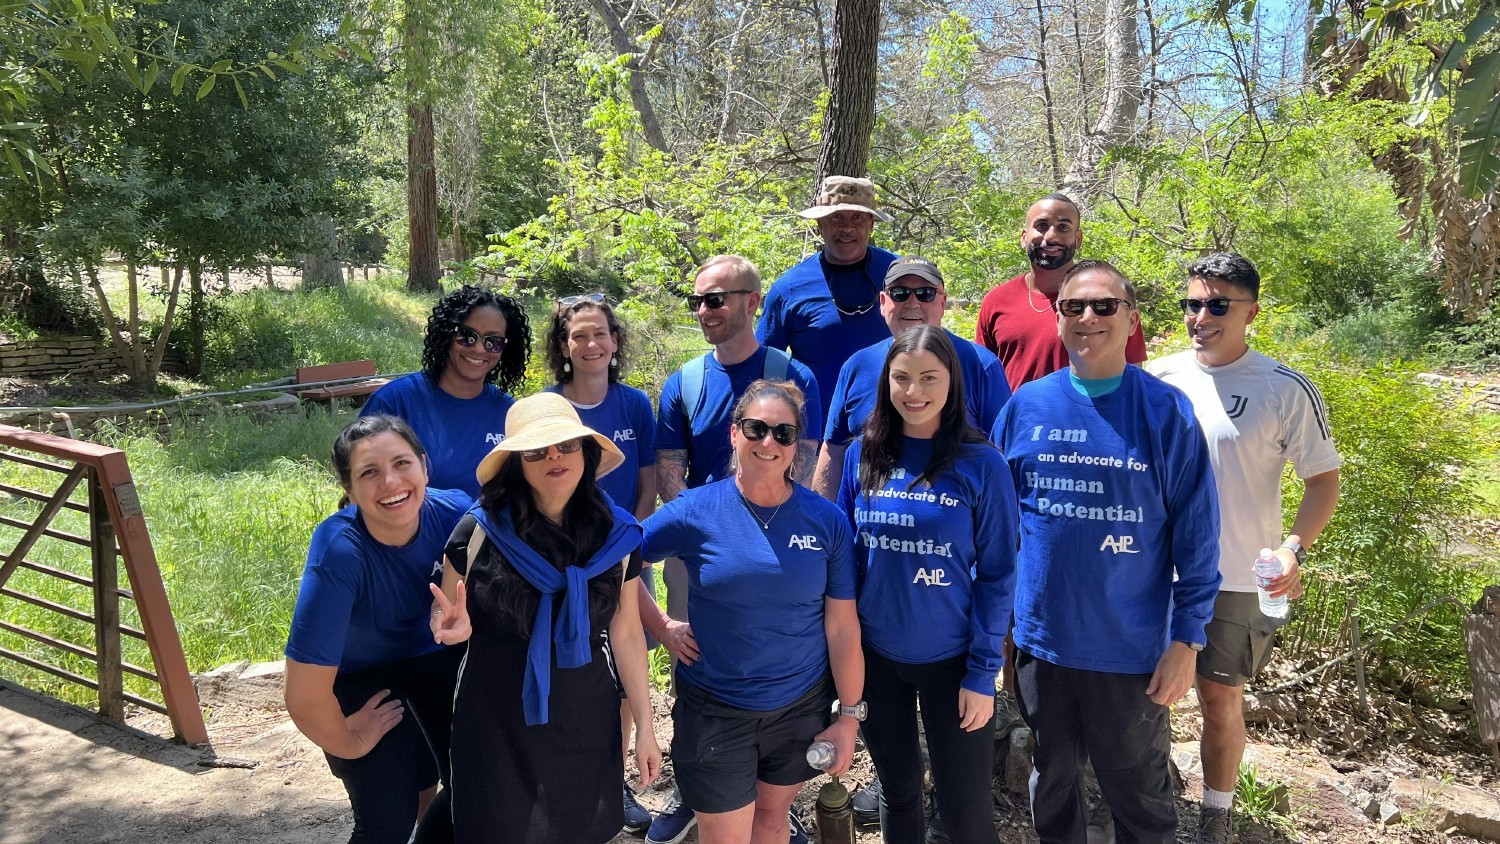 Members of AHP’s California team hiking in Los Angeles’ Griffith park during a day of team building and fun.